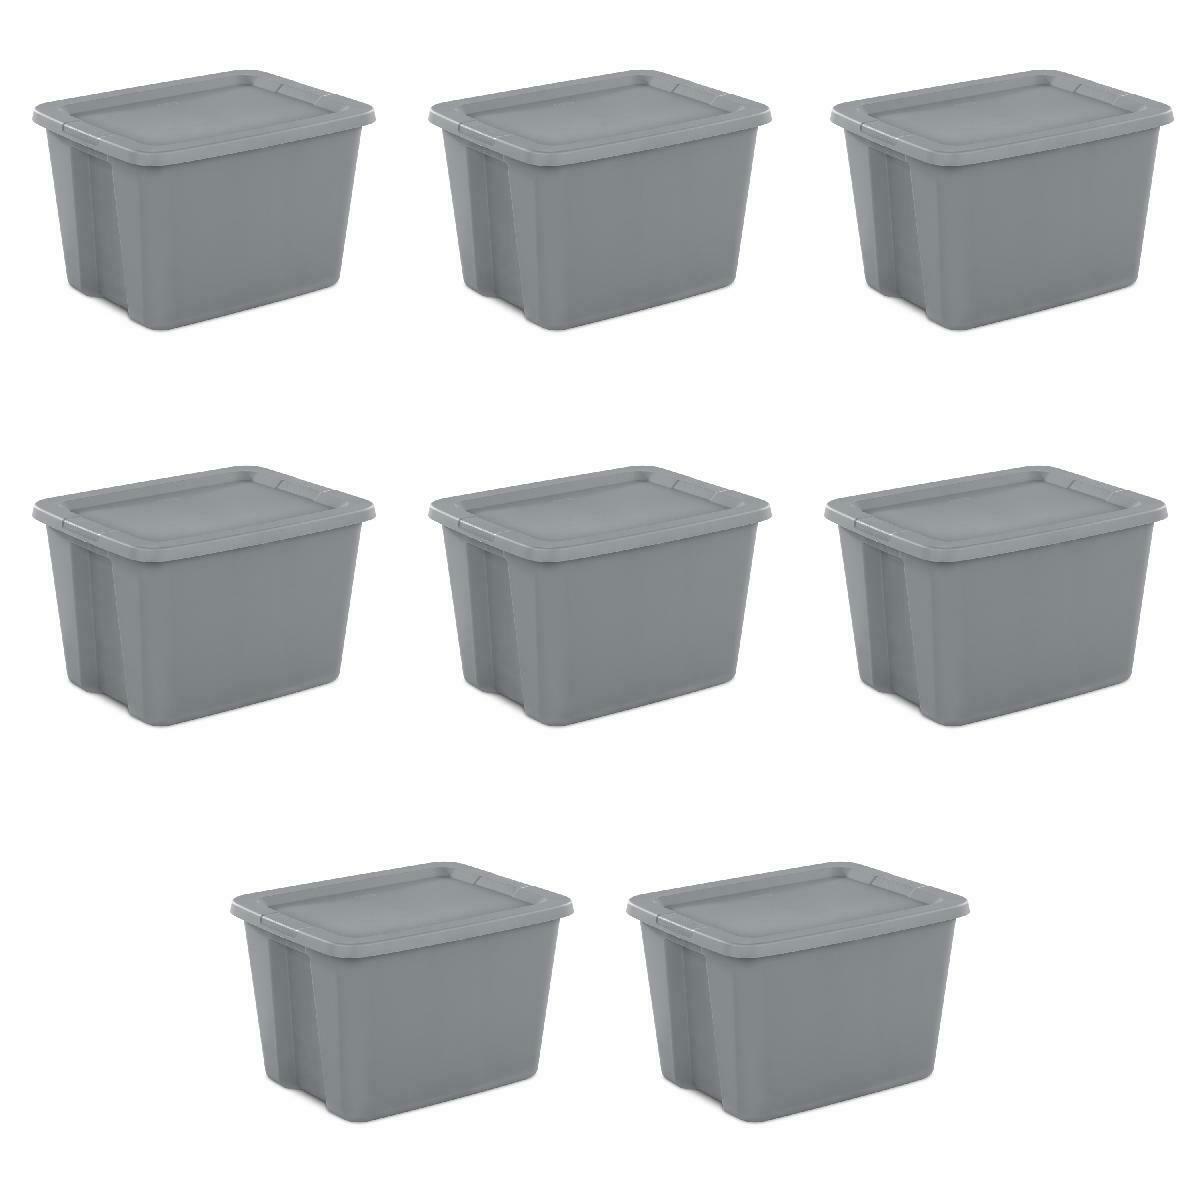 8/6 LARGE PLASTIC STORAGE CONTAINER 18 Gallon Stackable Organizer Tote Box W Lid